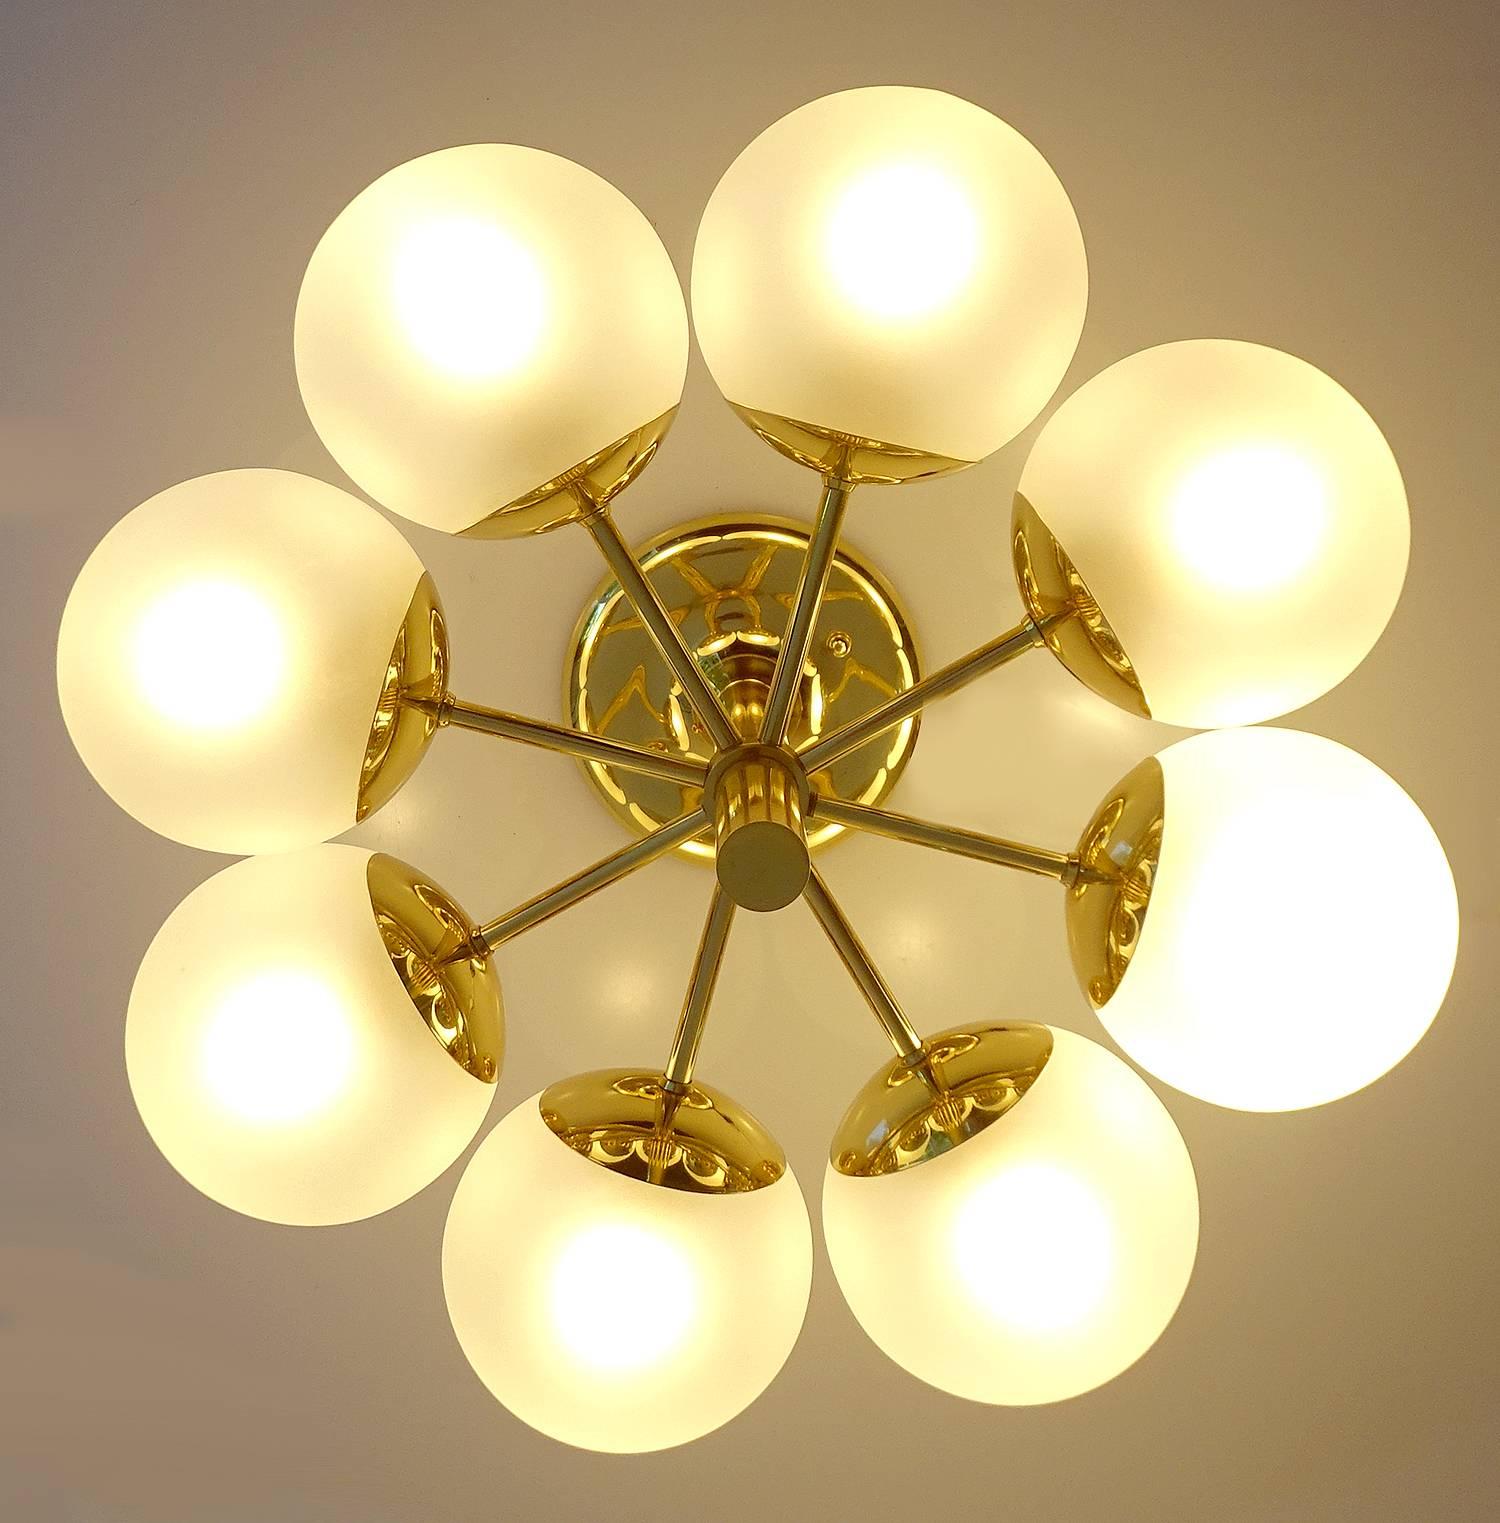 Elegant Kaiser sputnik chandelier / flush mount light . Circular Brass frame with eight satinated opaline glass globes 
11.81 in.H / 30 cmH
Diameter
20.08 in. (51 cm)
Eight candelabra size bulbs, 40 watts each - All our lights electricals are